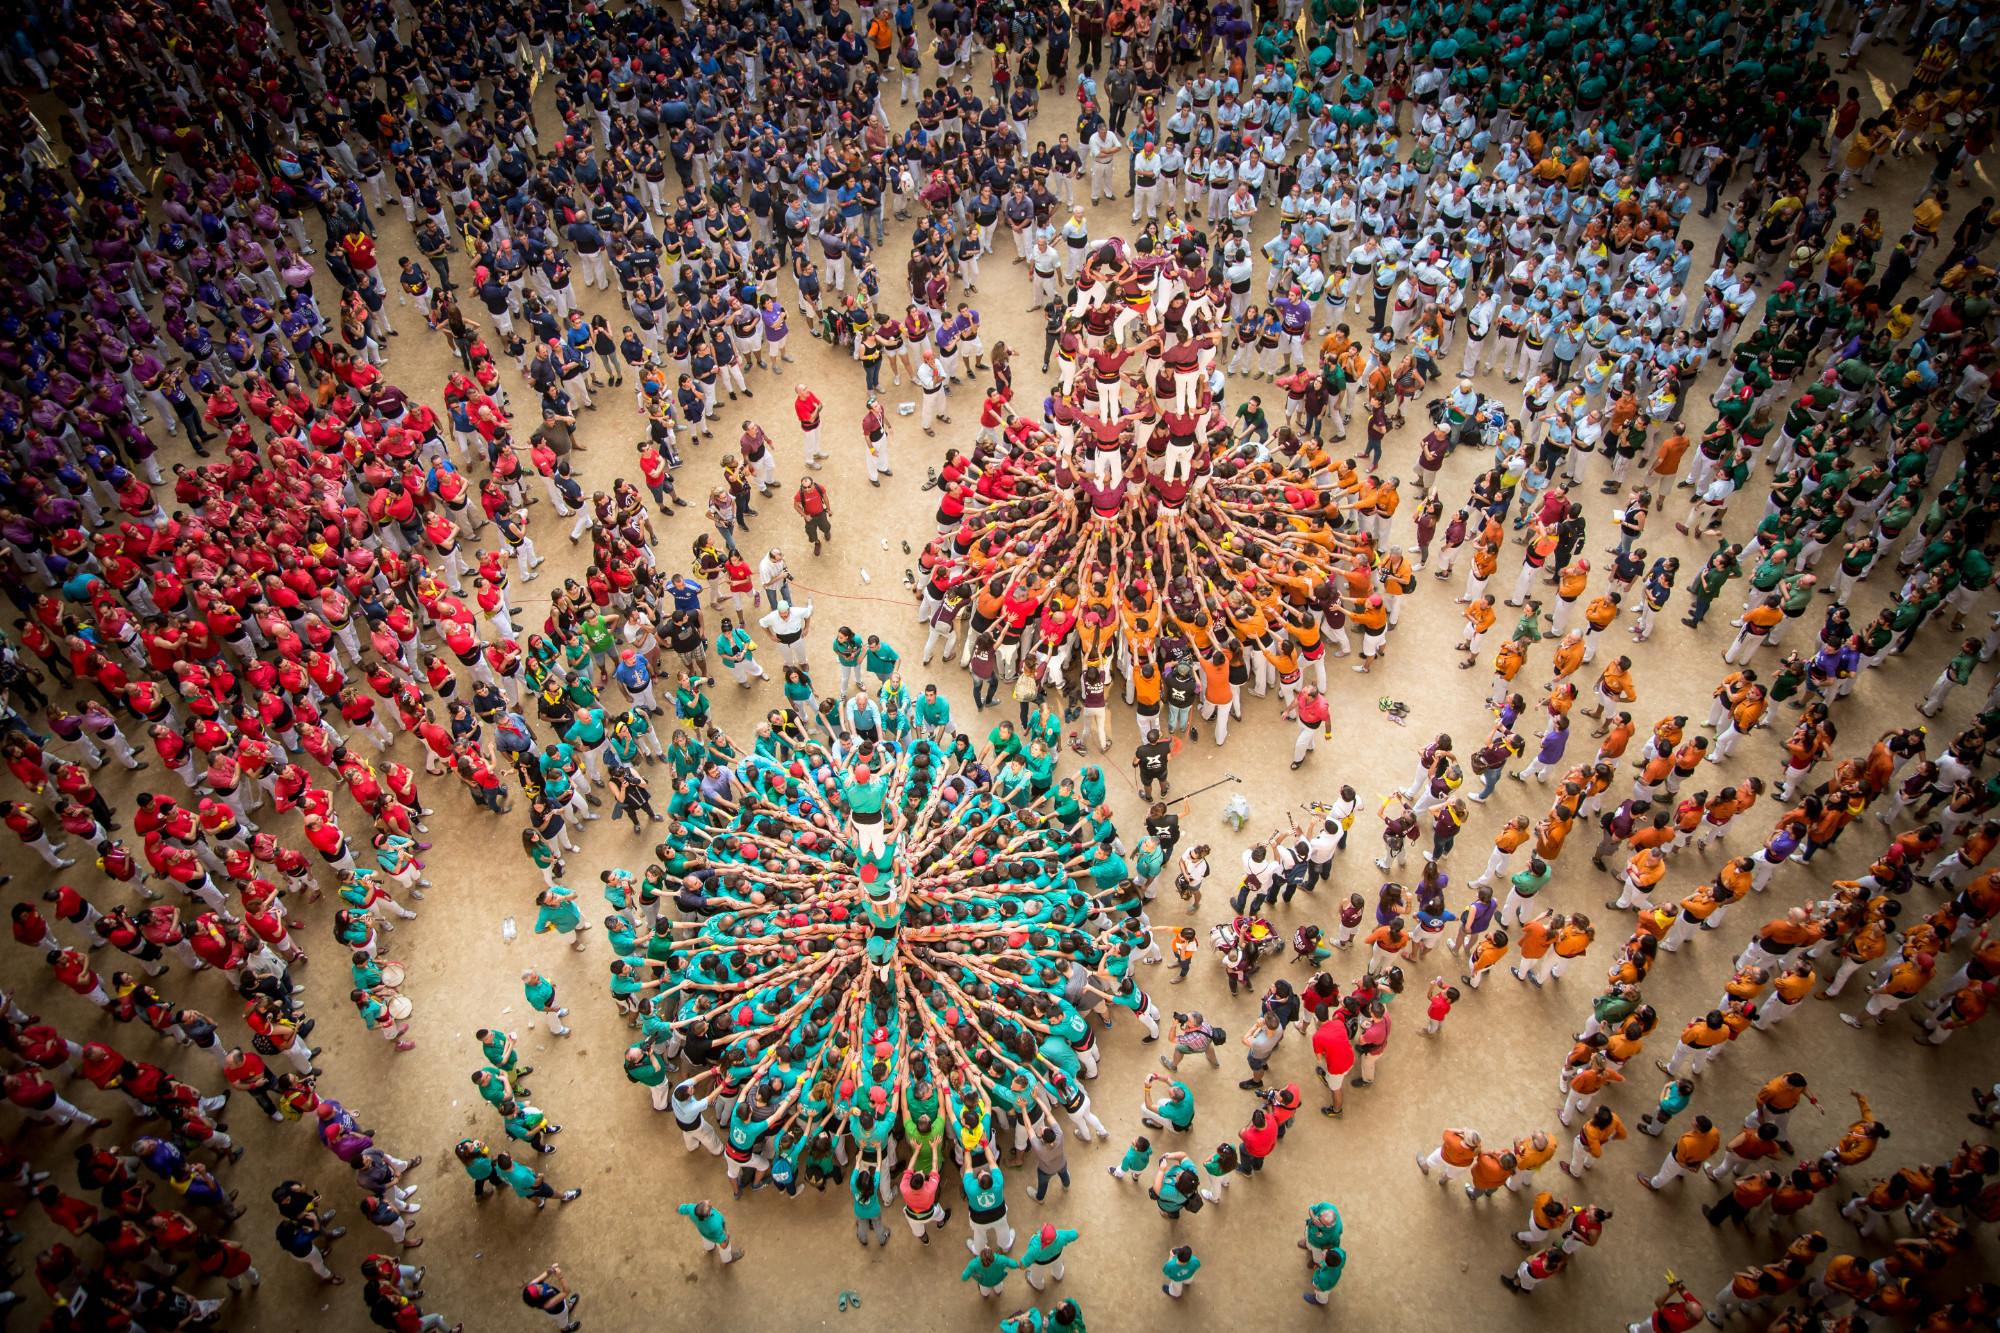 The Colla Jove de Castellers from Sitges and the Colla Castellera Sant Pere i Sant Pau perform in a joint round during the Tarragona Human Tower Competition.- – © David Oliete